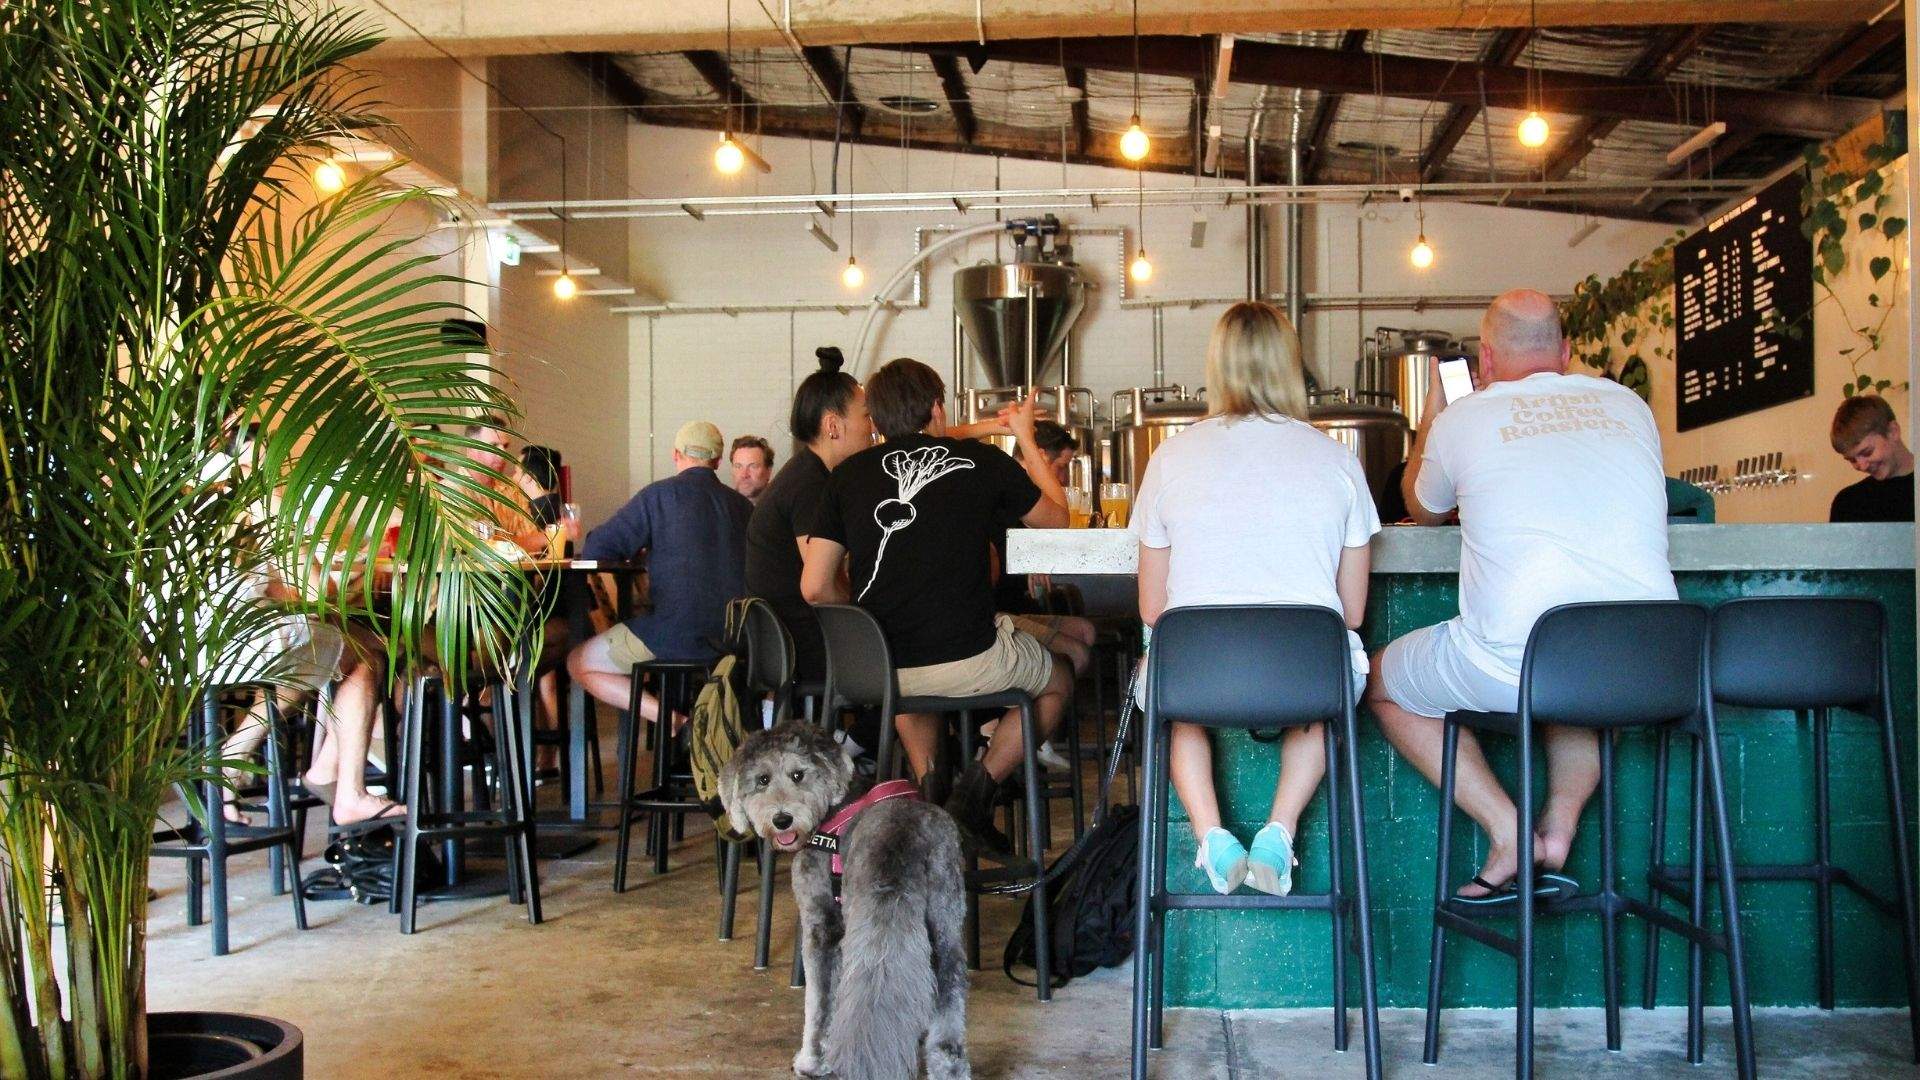 Future Brewing Is St Peters' New Cali-Style Microbrewery Pouring Boundary-Pushing Beer